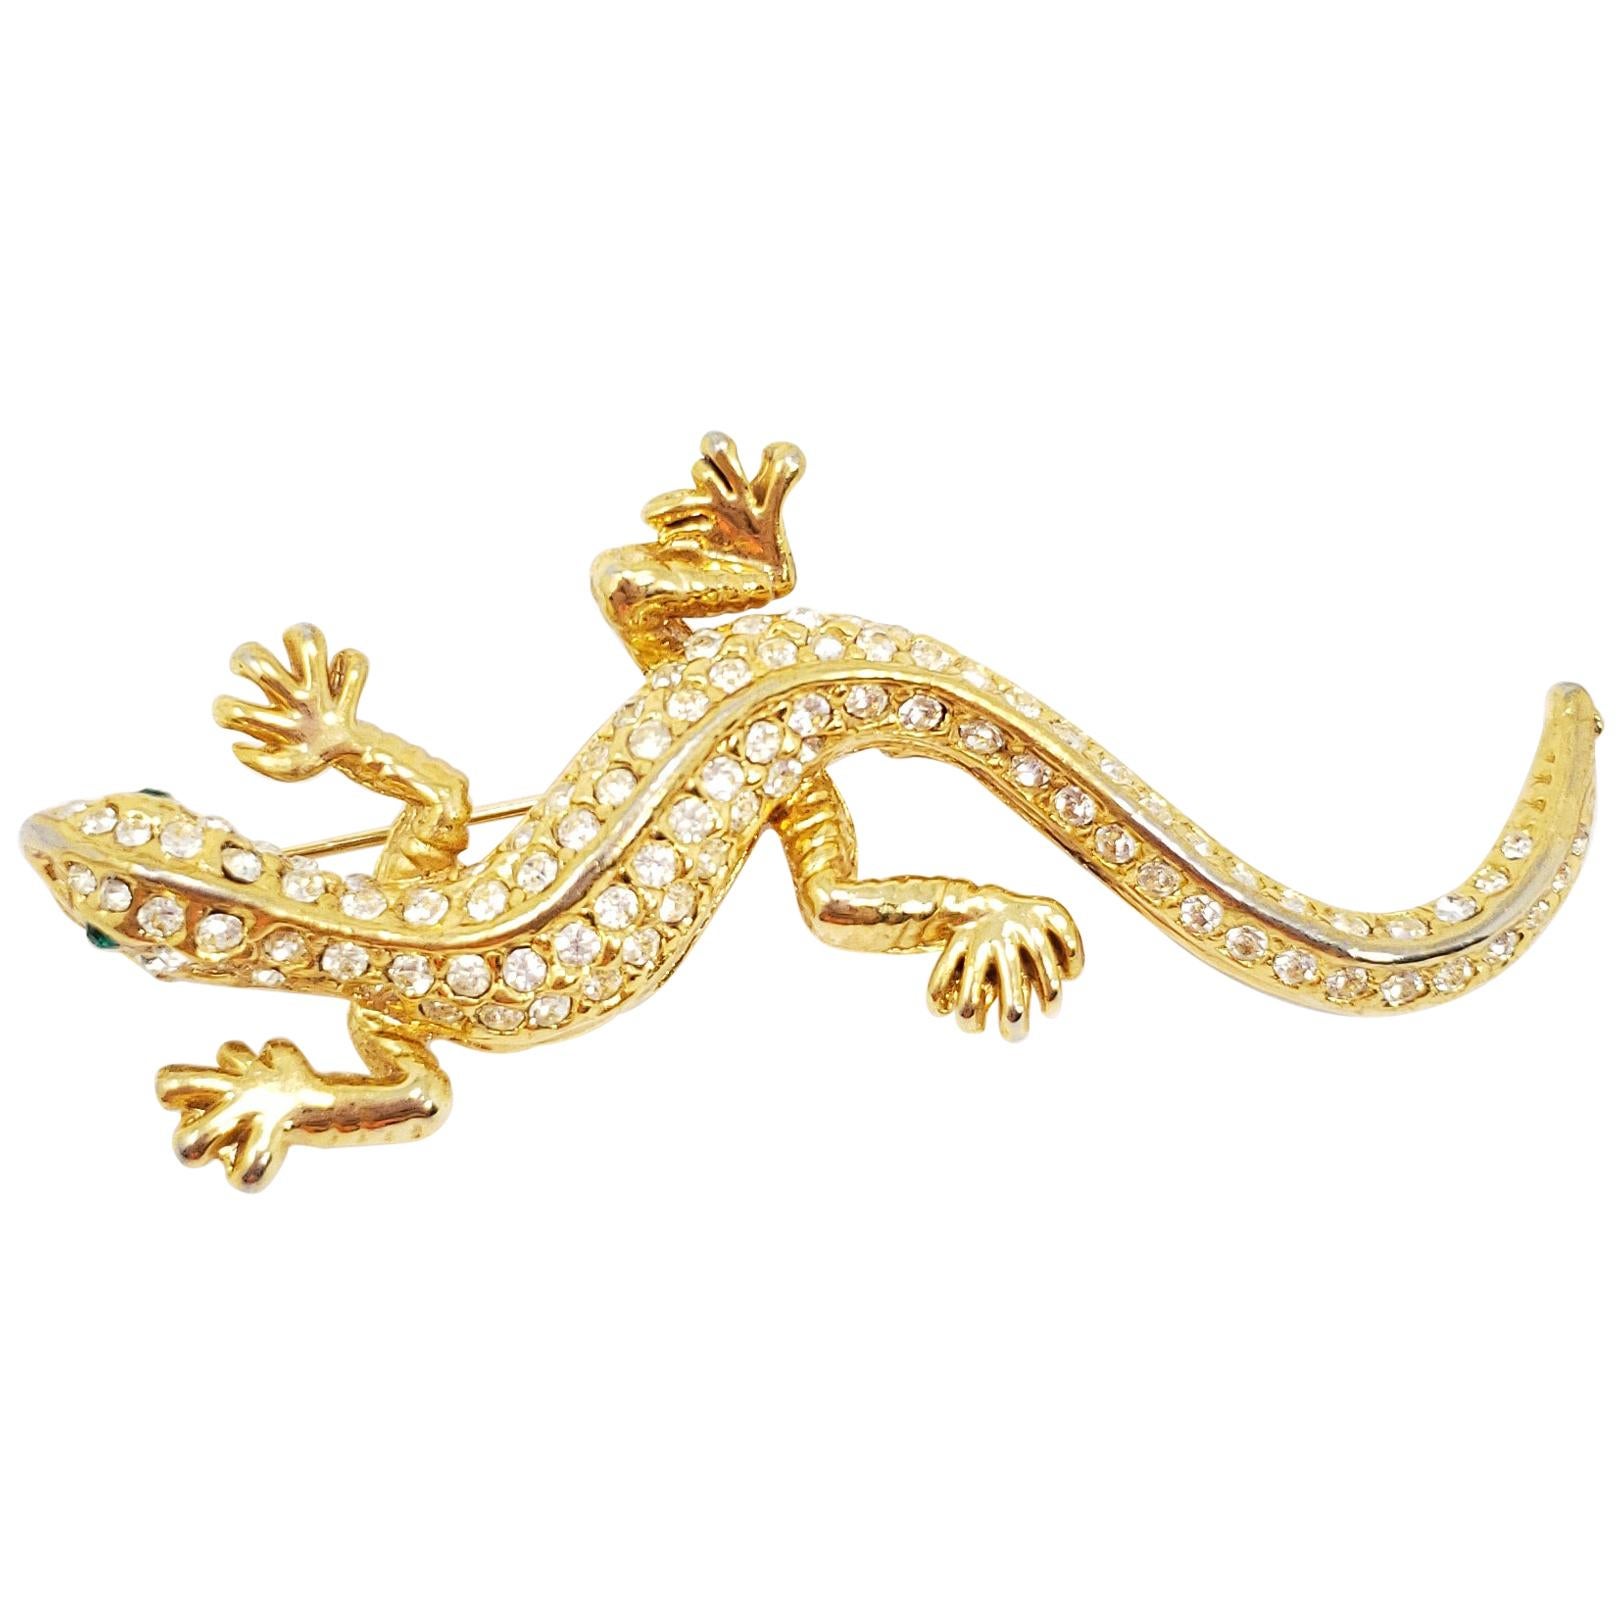 Retro Salamander Brooch Pin in Gold, Vintage Mid 1900s, United States For Sale